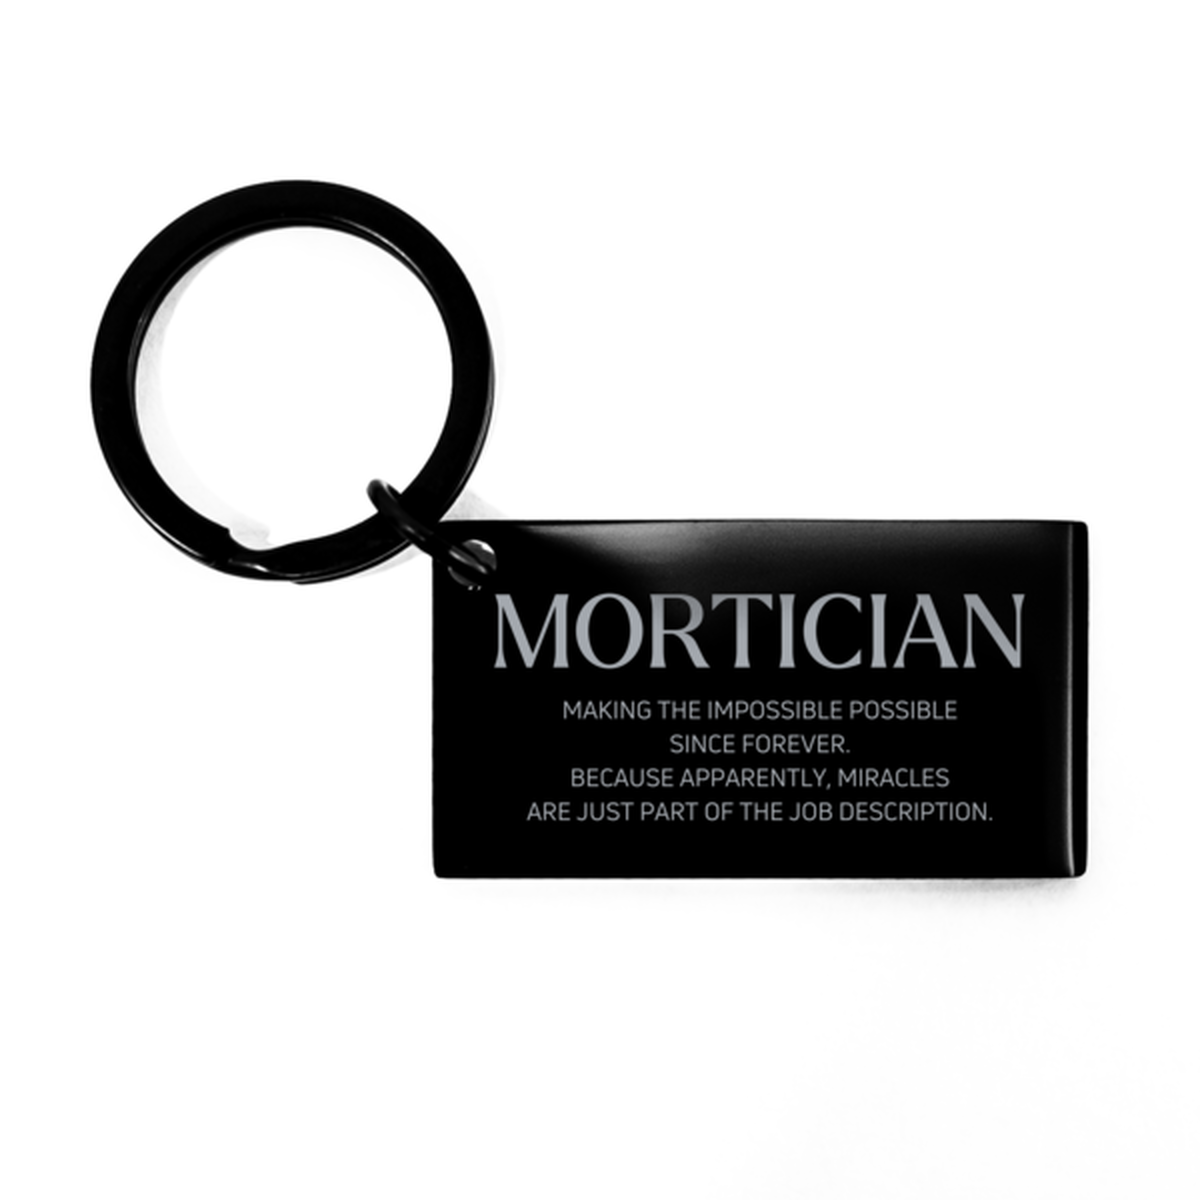 Funny Mortician Gifts, Miracles are just part of the job description, Inspirational Birthday Keychain For Mortician, Men, Women, Coworkers, Friends, Boss